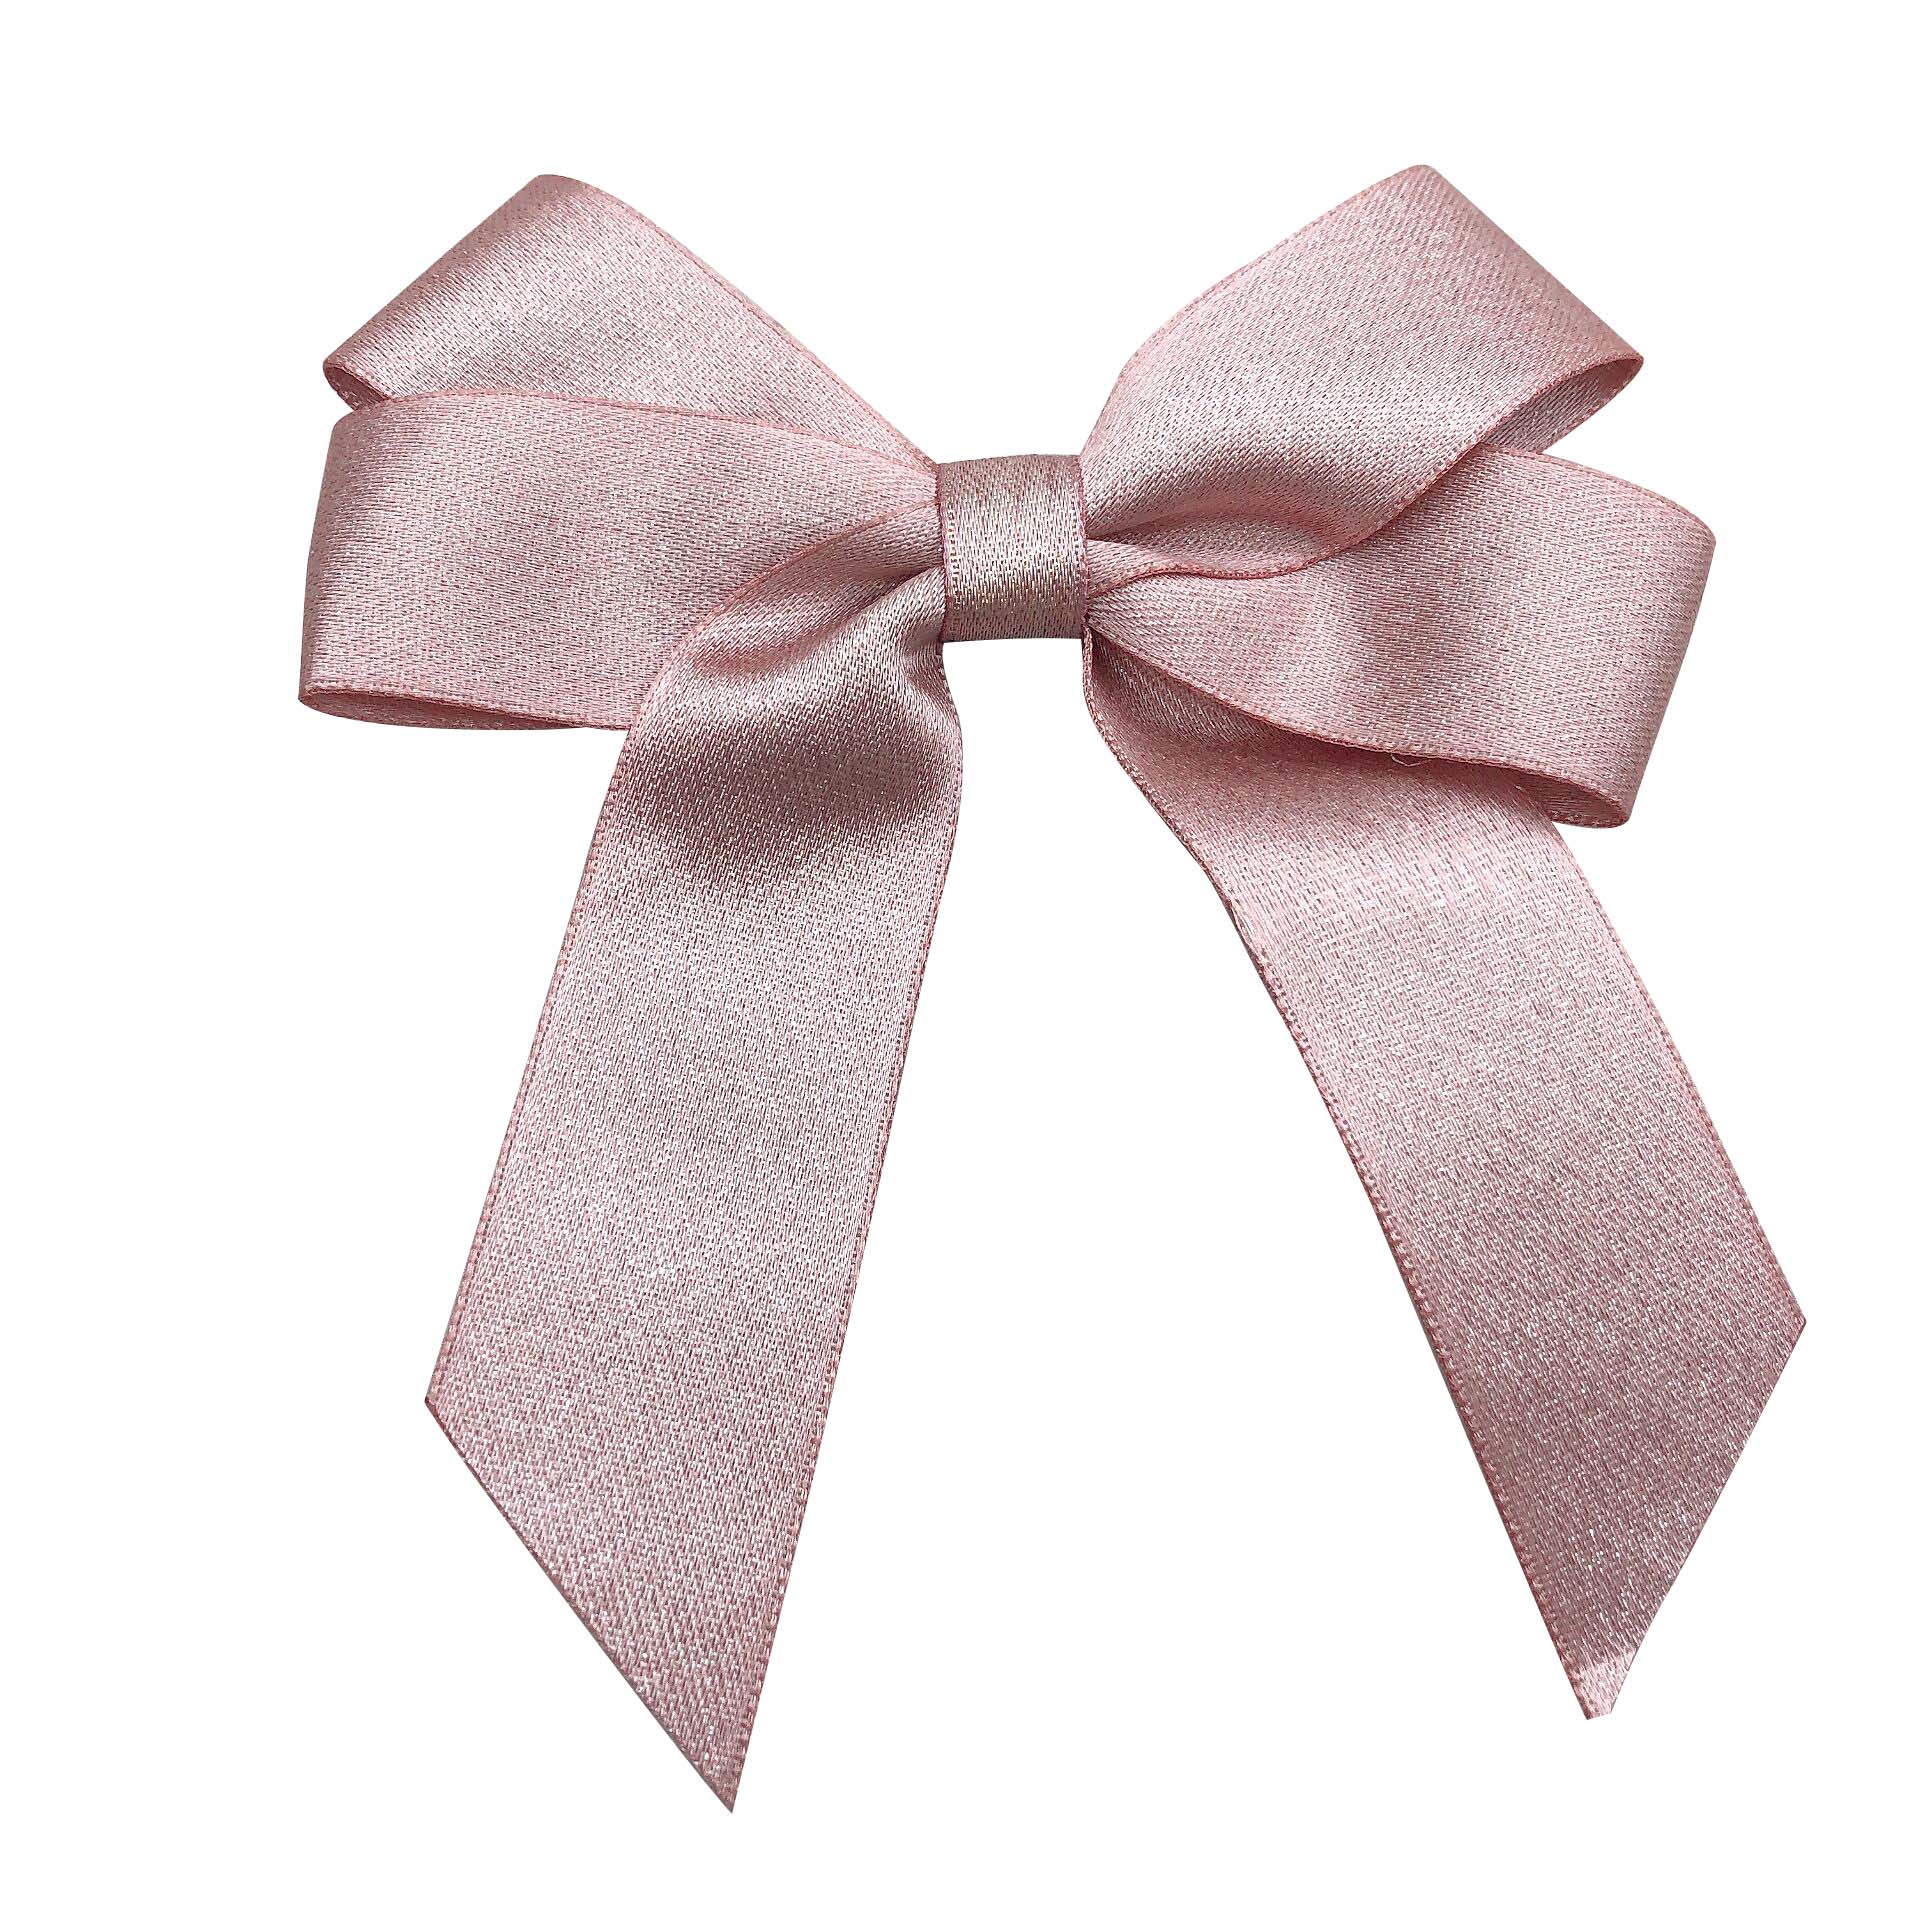 Gordon Ribbons Pink Color Handmade Metallic Ribbon Bow Pre-made Bow For Box Bottle Wine Perfume Decoration Bow